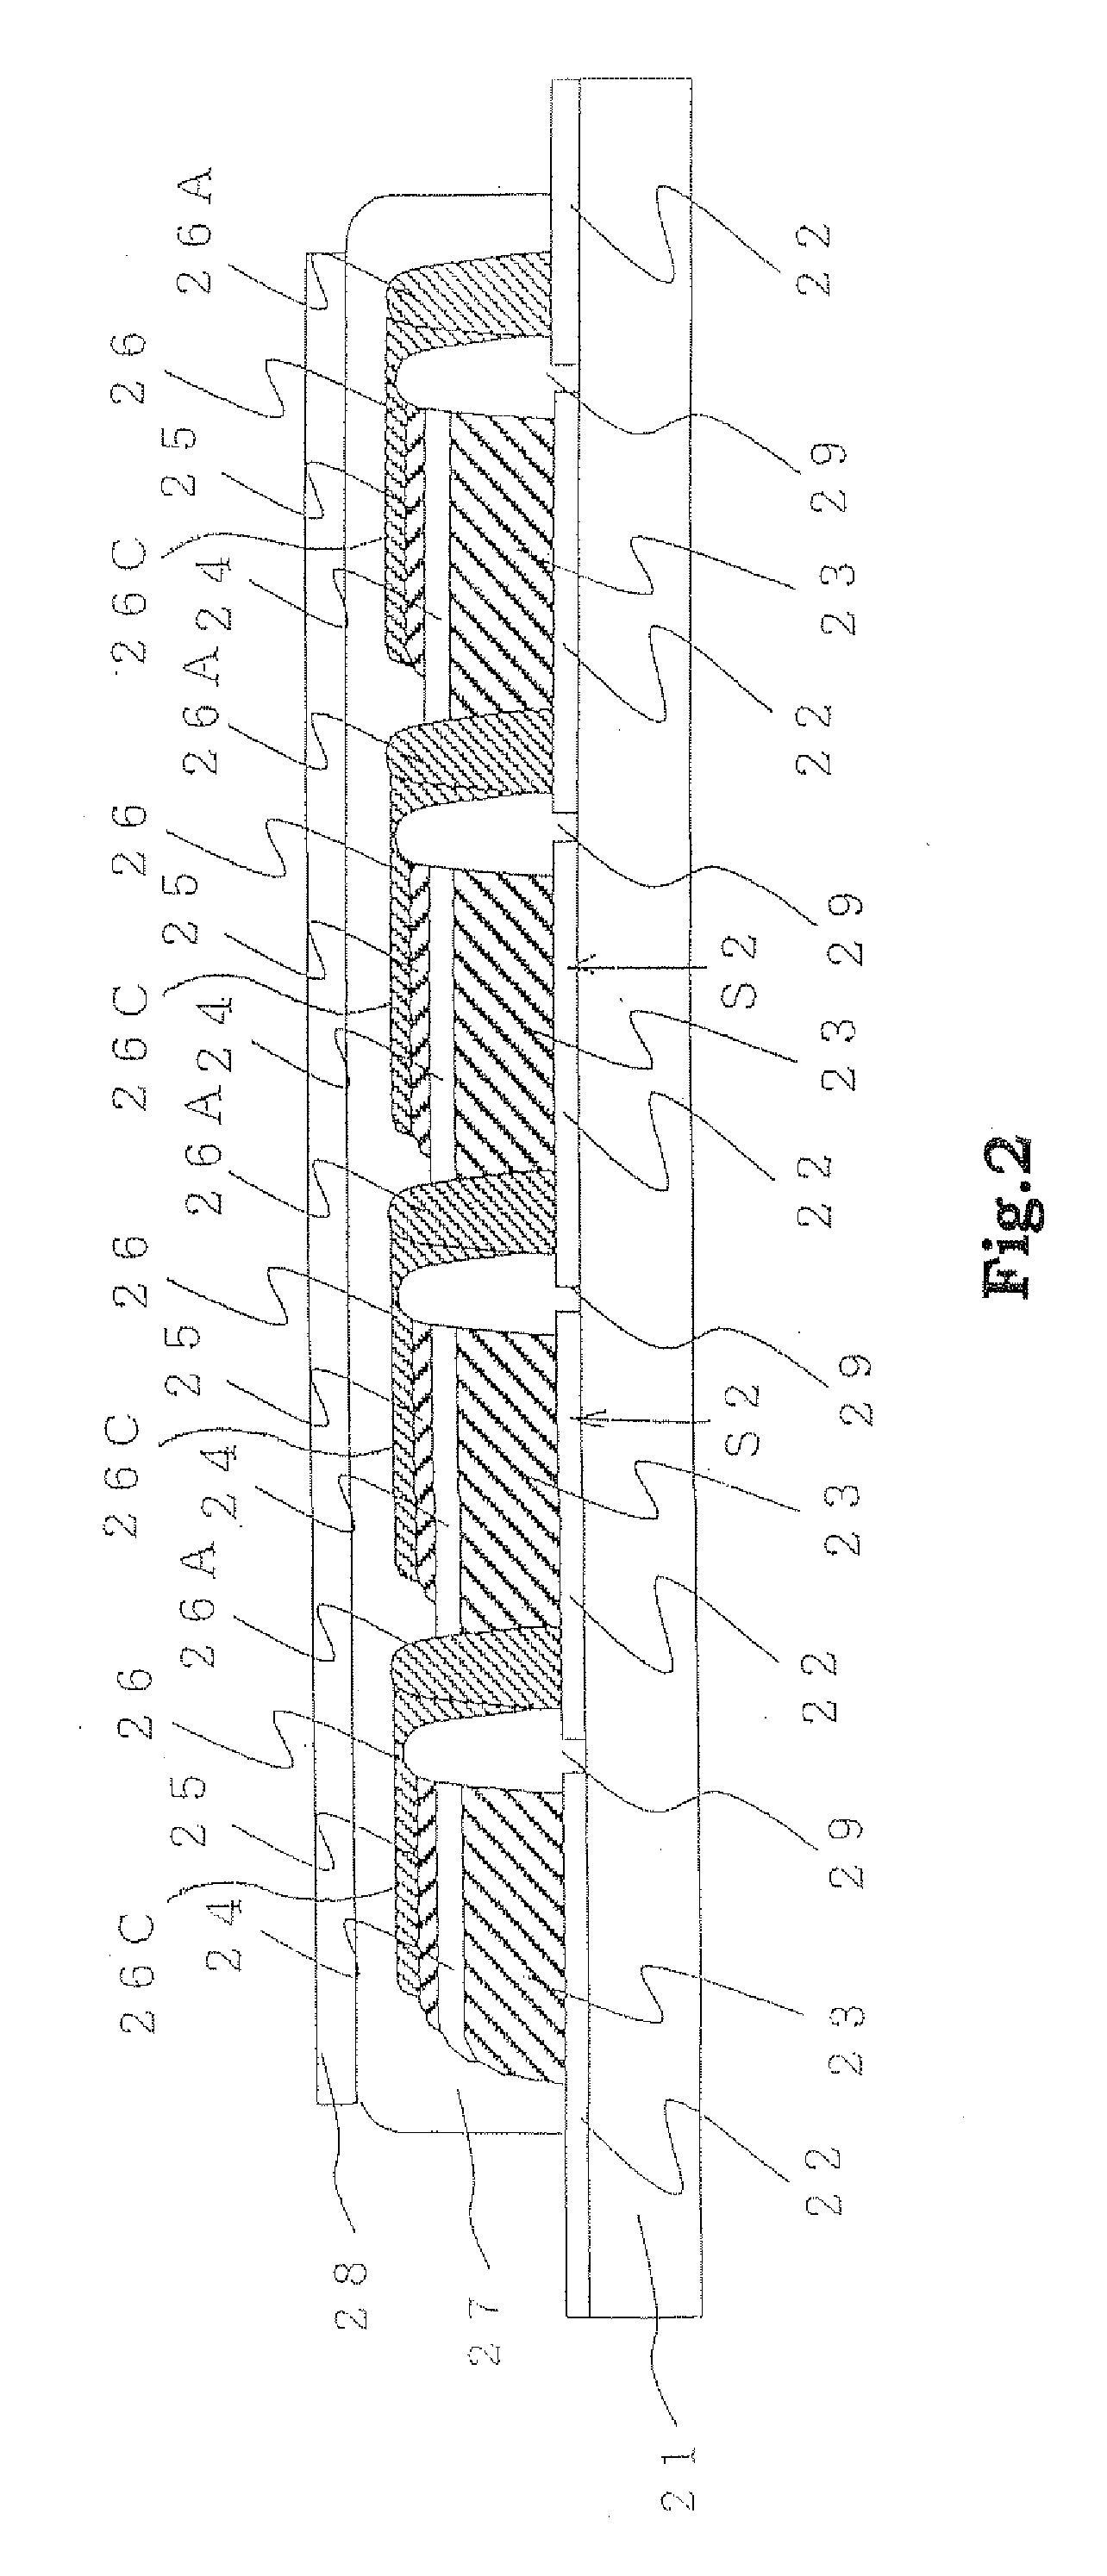 Dye-sensitized solar cell module and method of producing the same